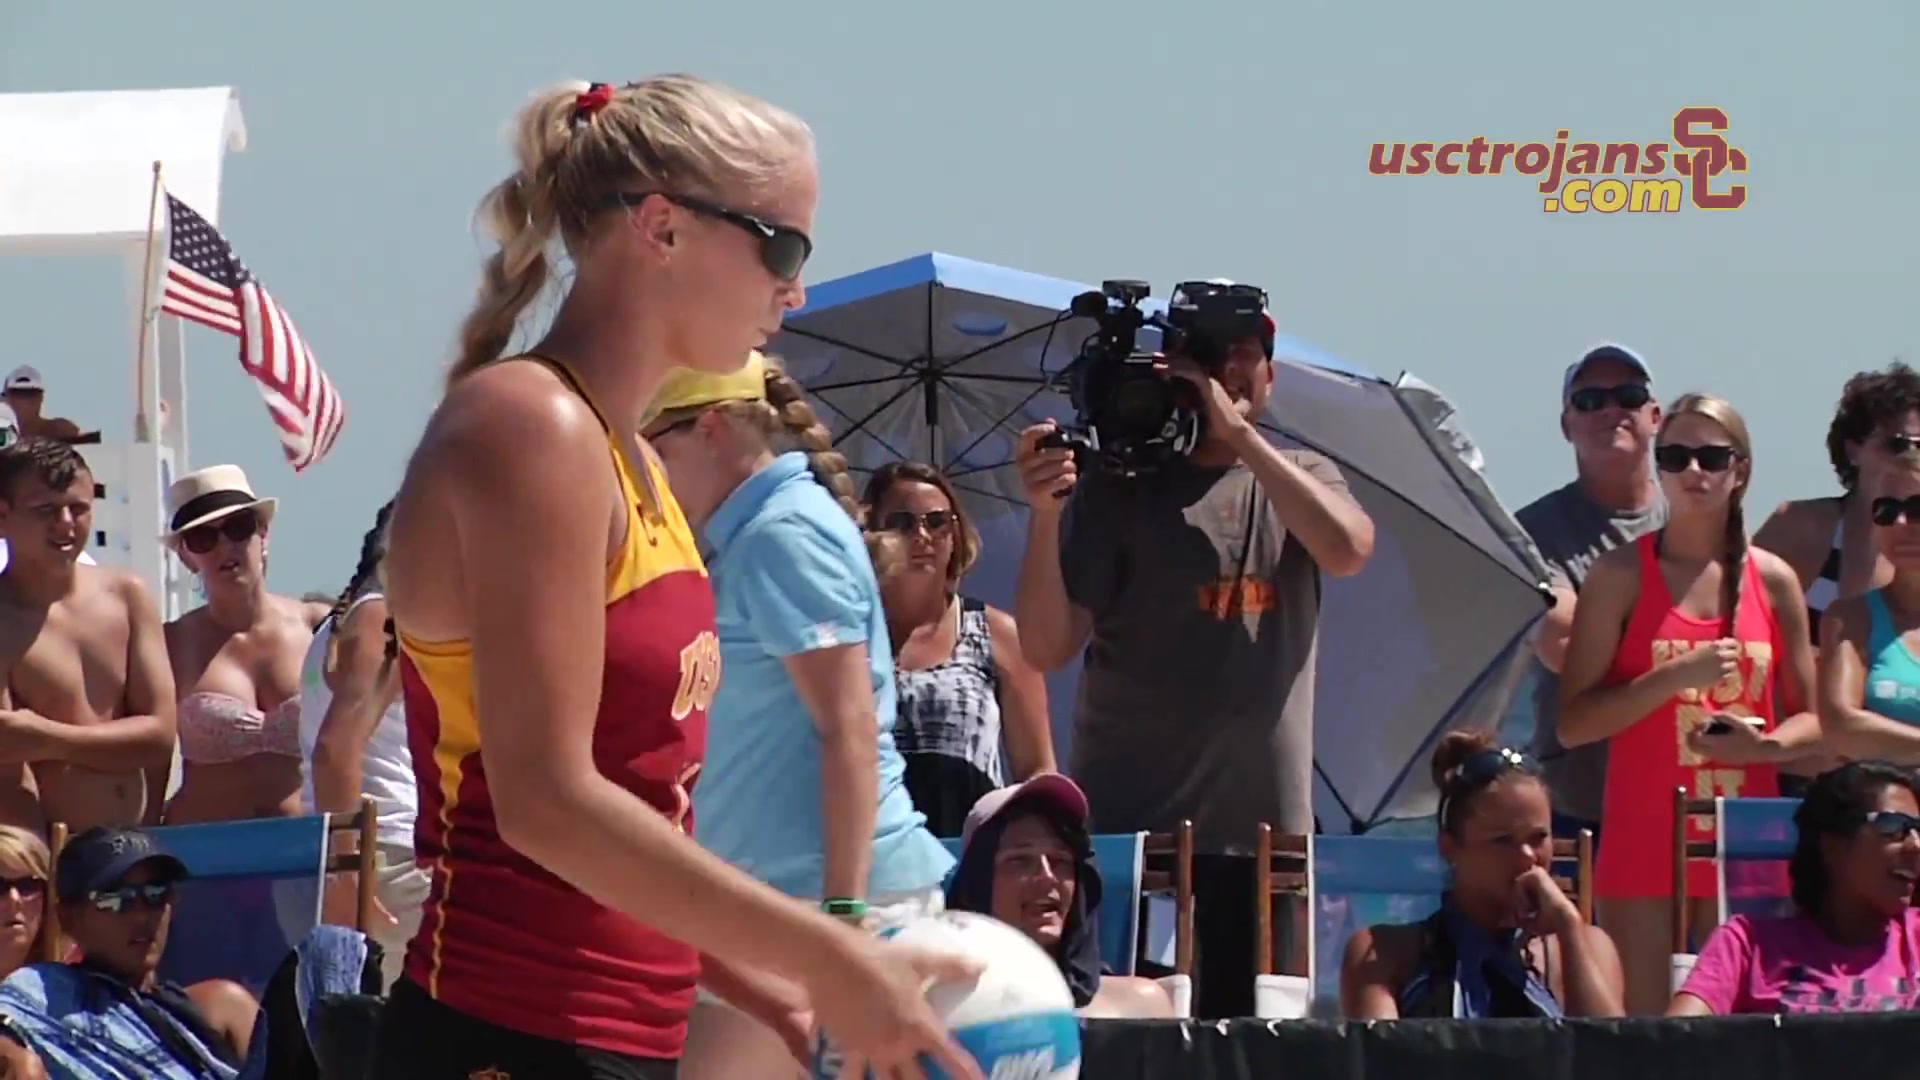 USC Sand Volleyball - Sara and Kelly Clinch AVCA Pairs